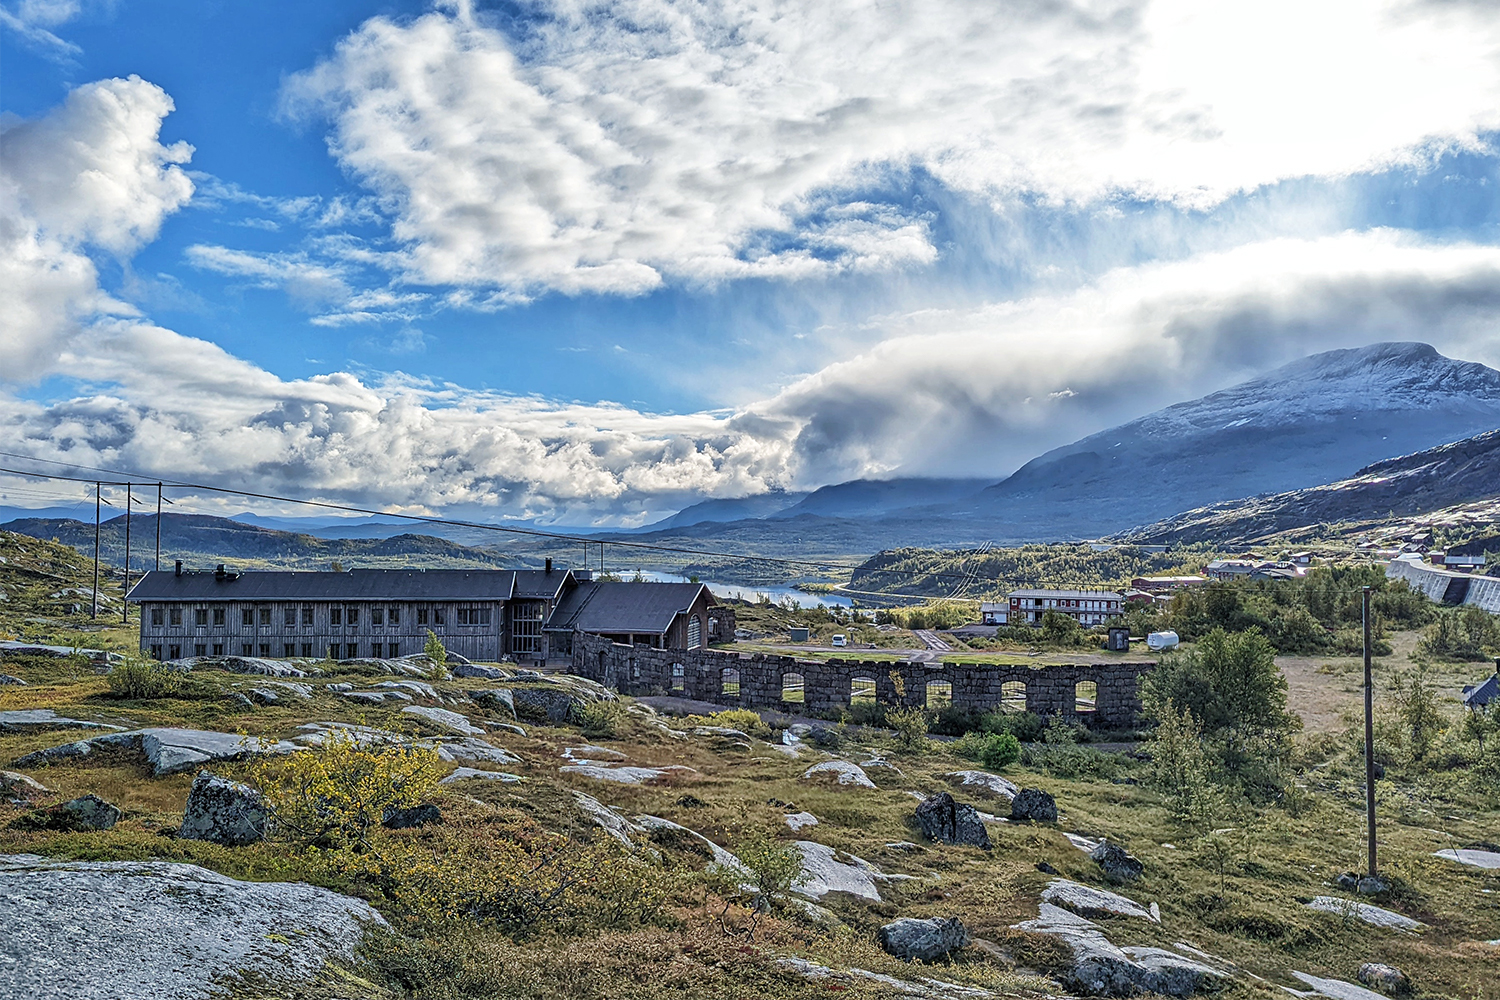 Niehku Mountain Villa in Swedish Lapland with the mountains and clouds behind